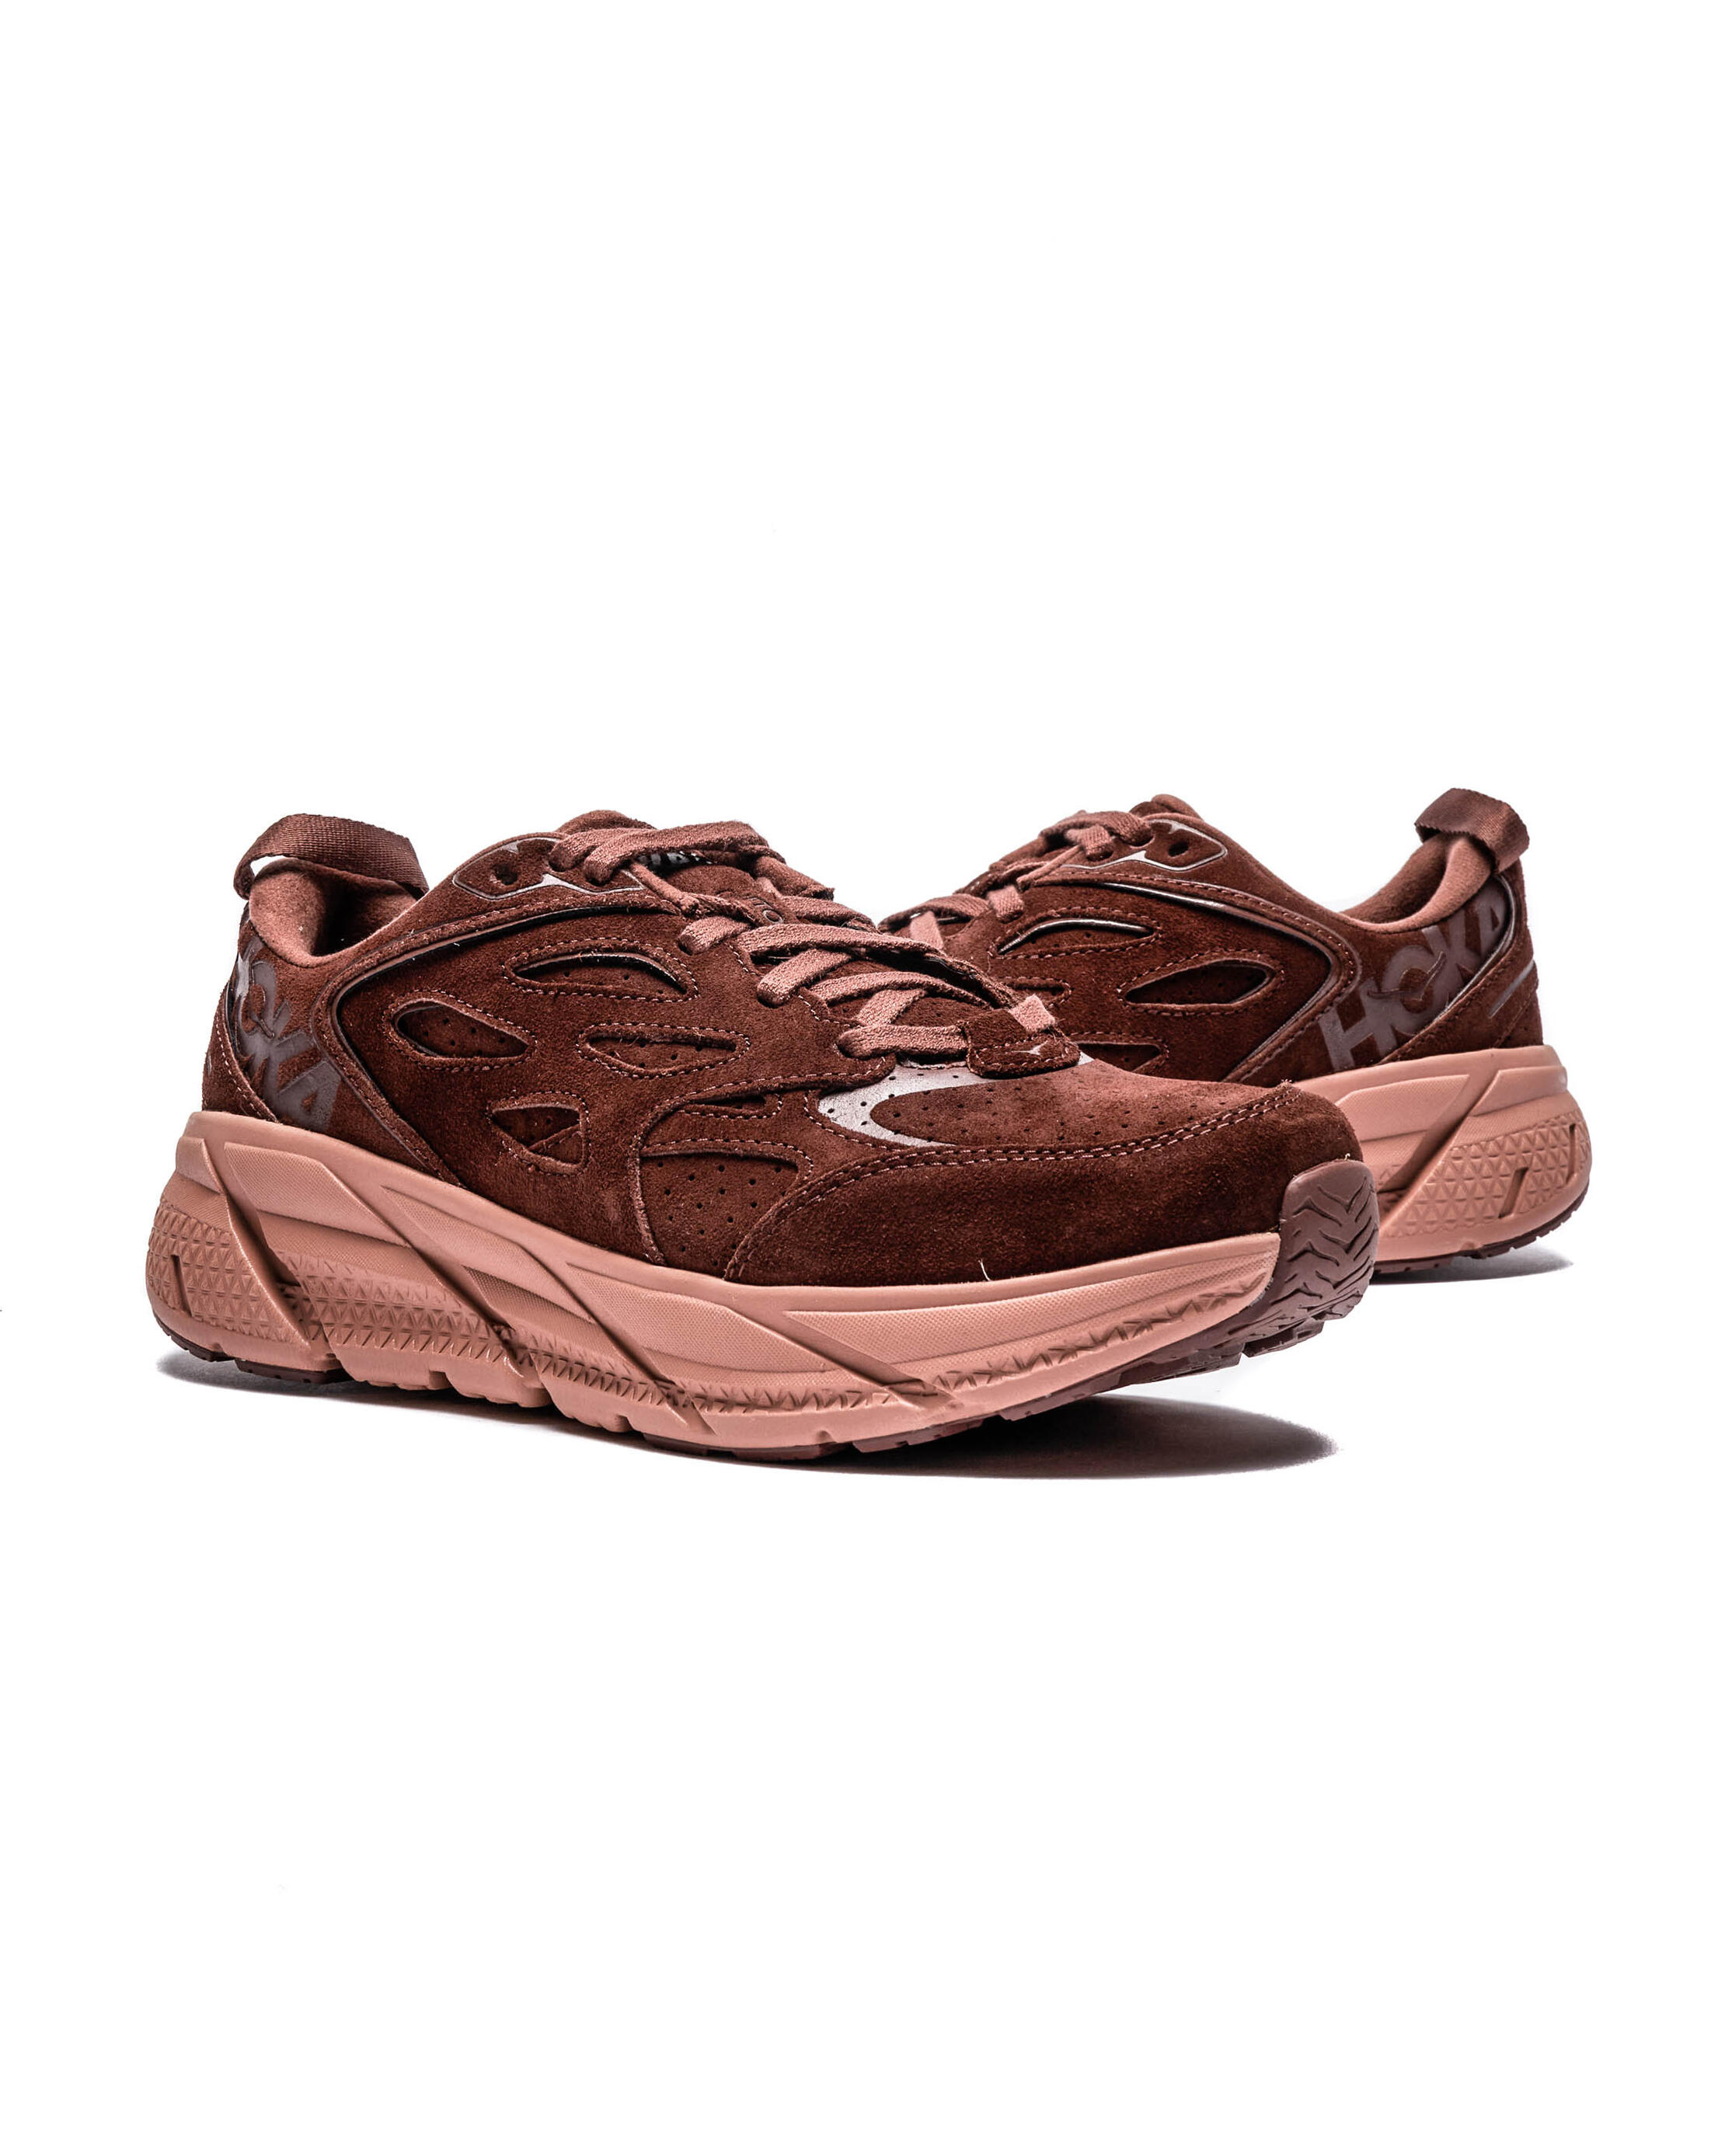 Hoka One One CLIFTON L | 1122571-CCCR | AFEW STORE